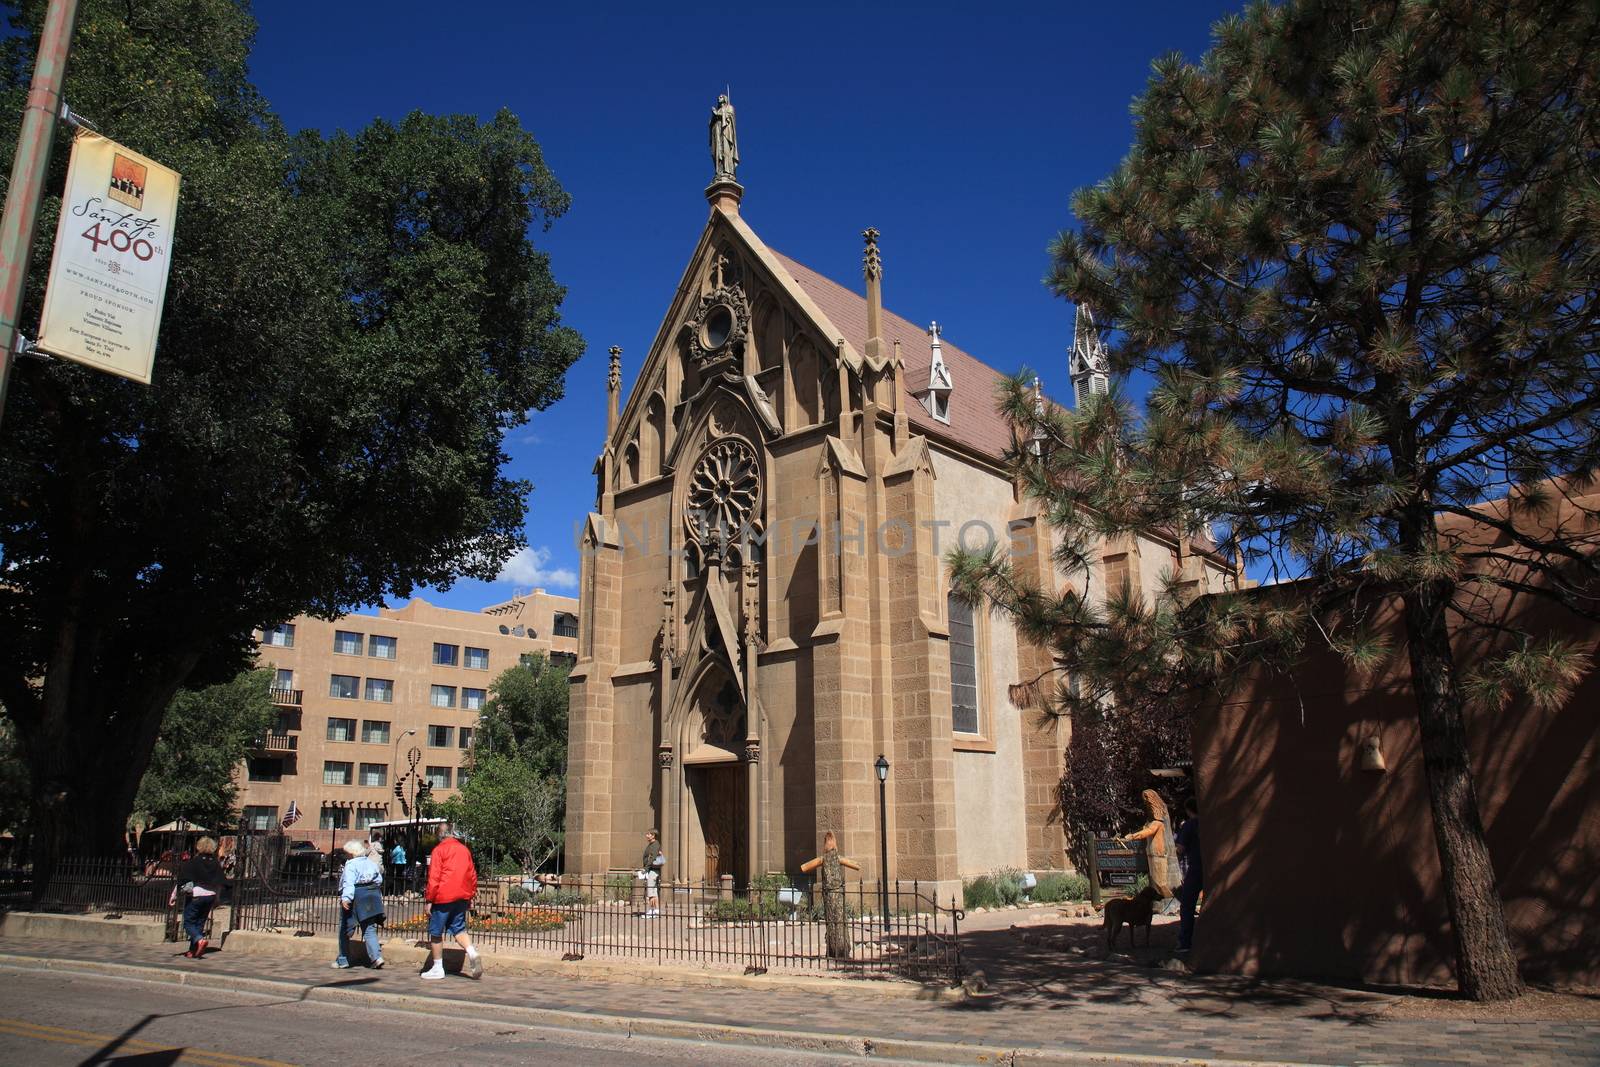 Loretto Chapel, Santa Fe, New Mexico by Ffooter